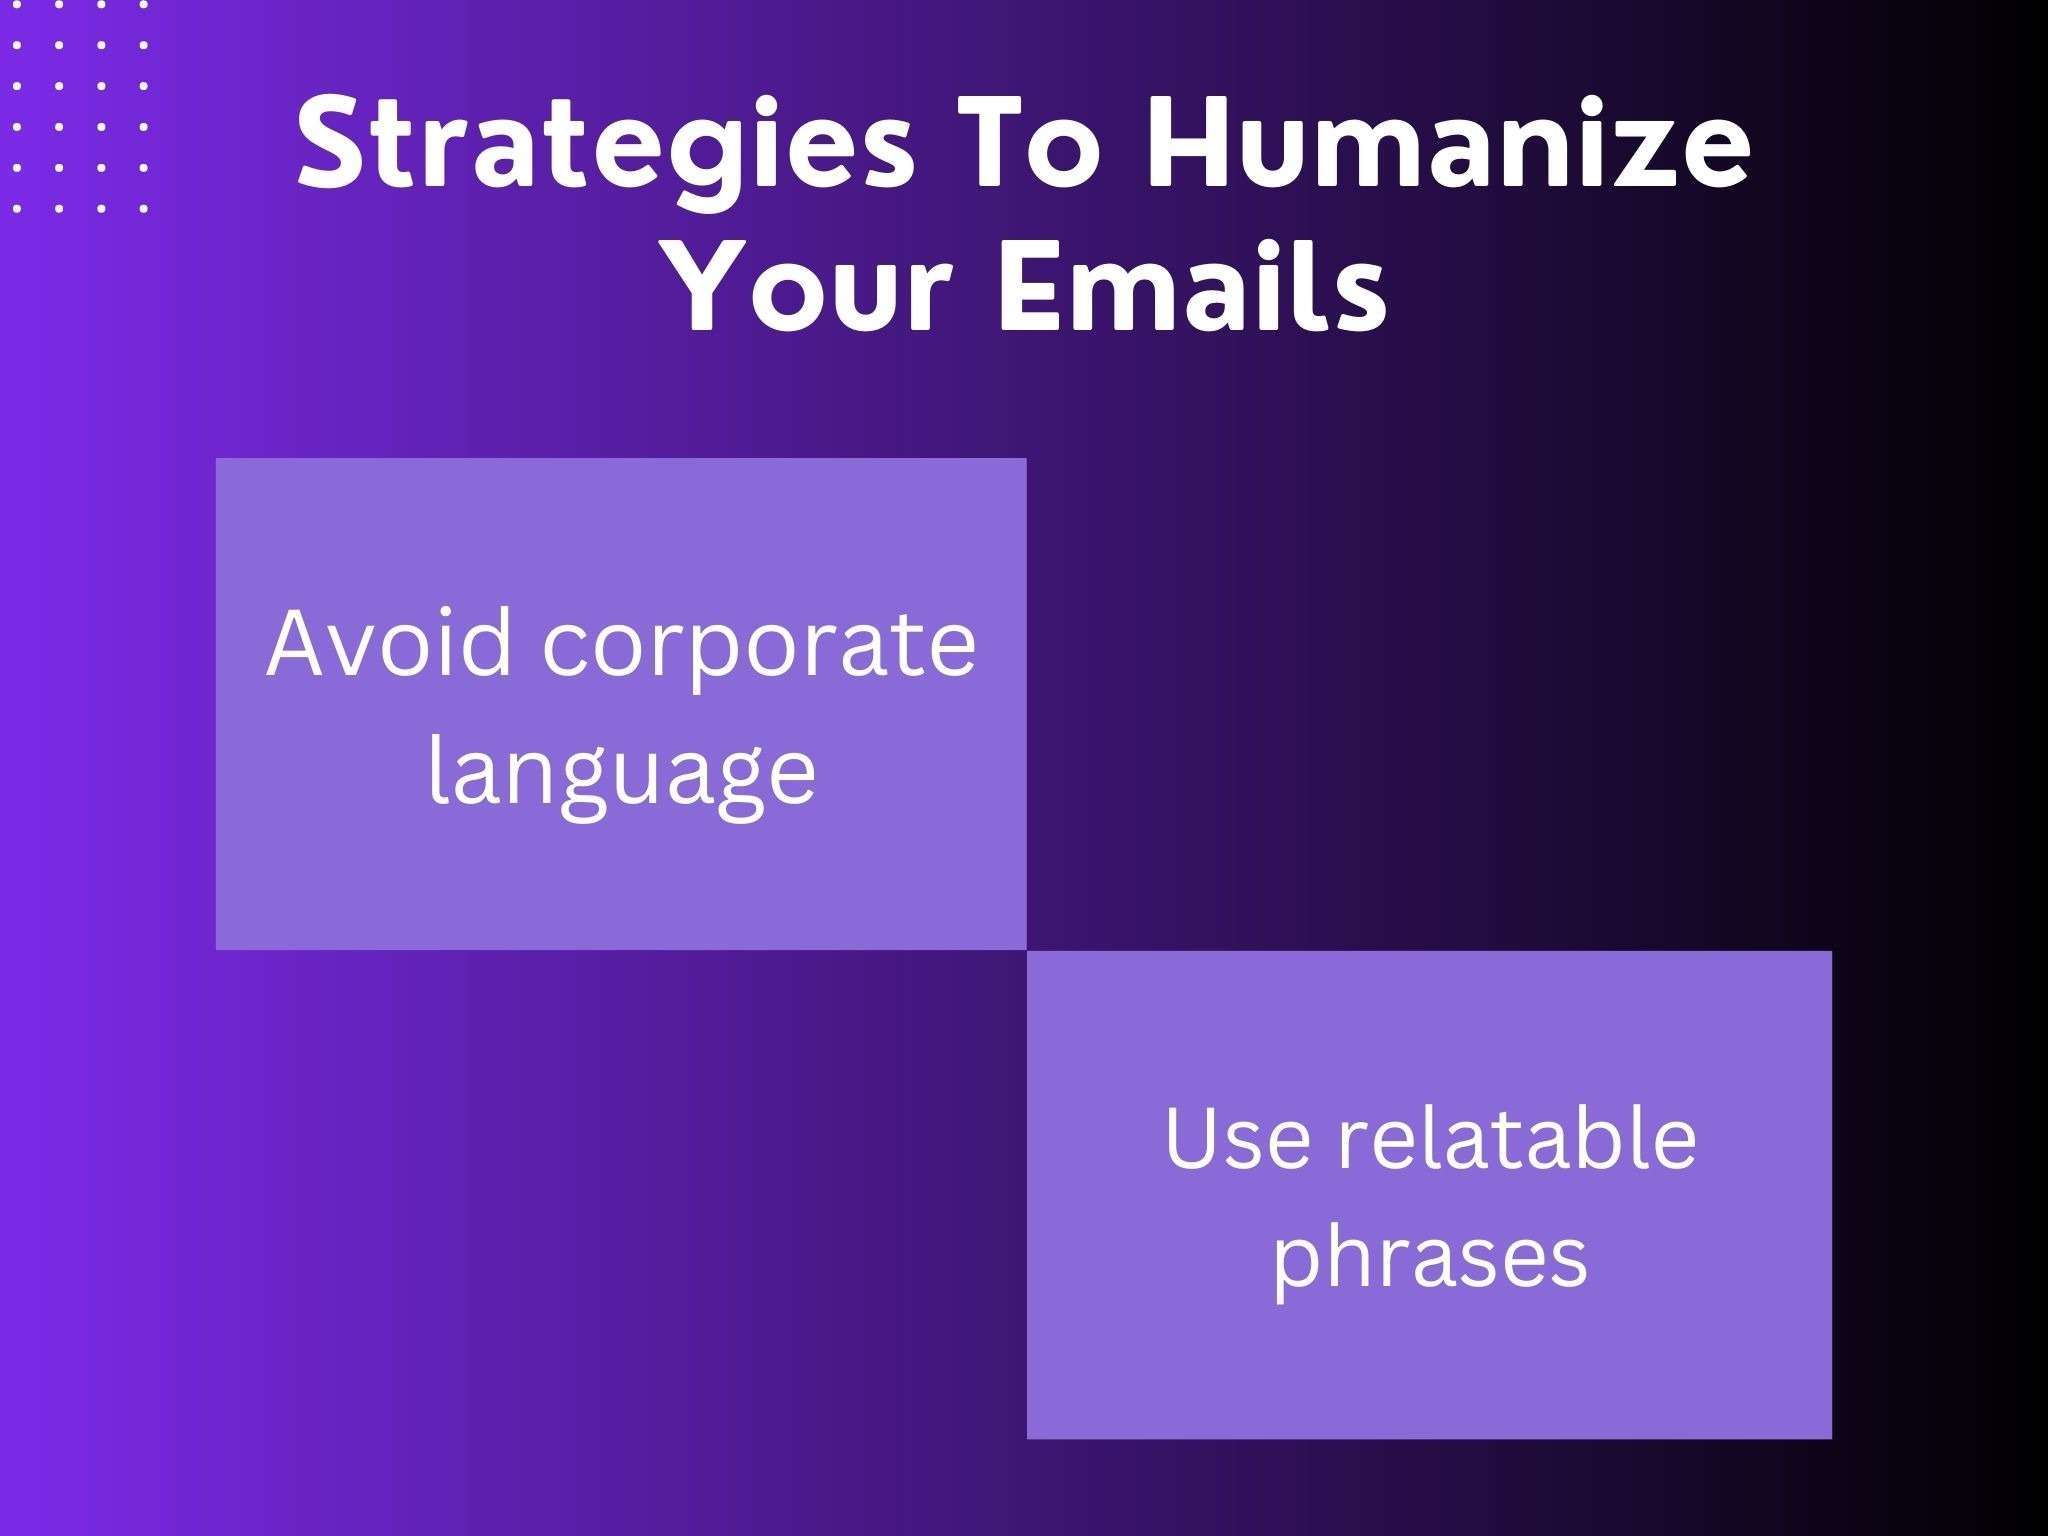 Strategies to humanize your emails